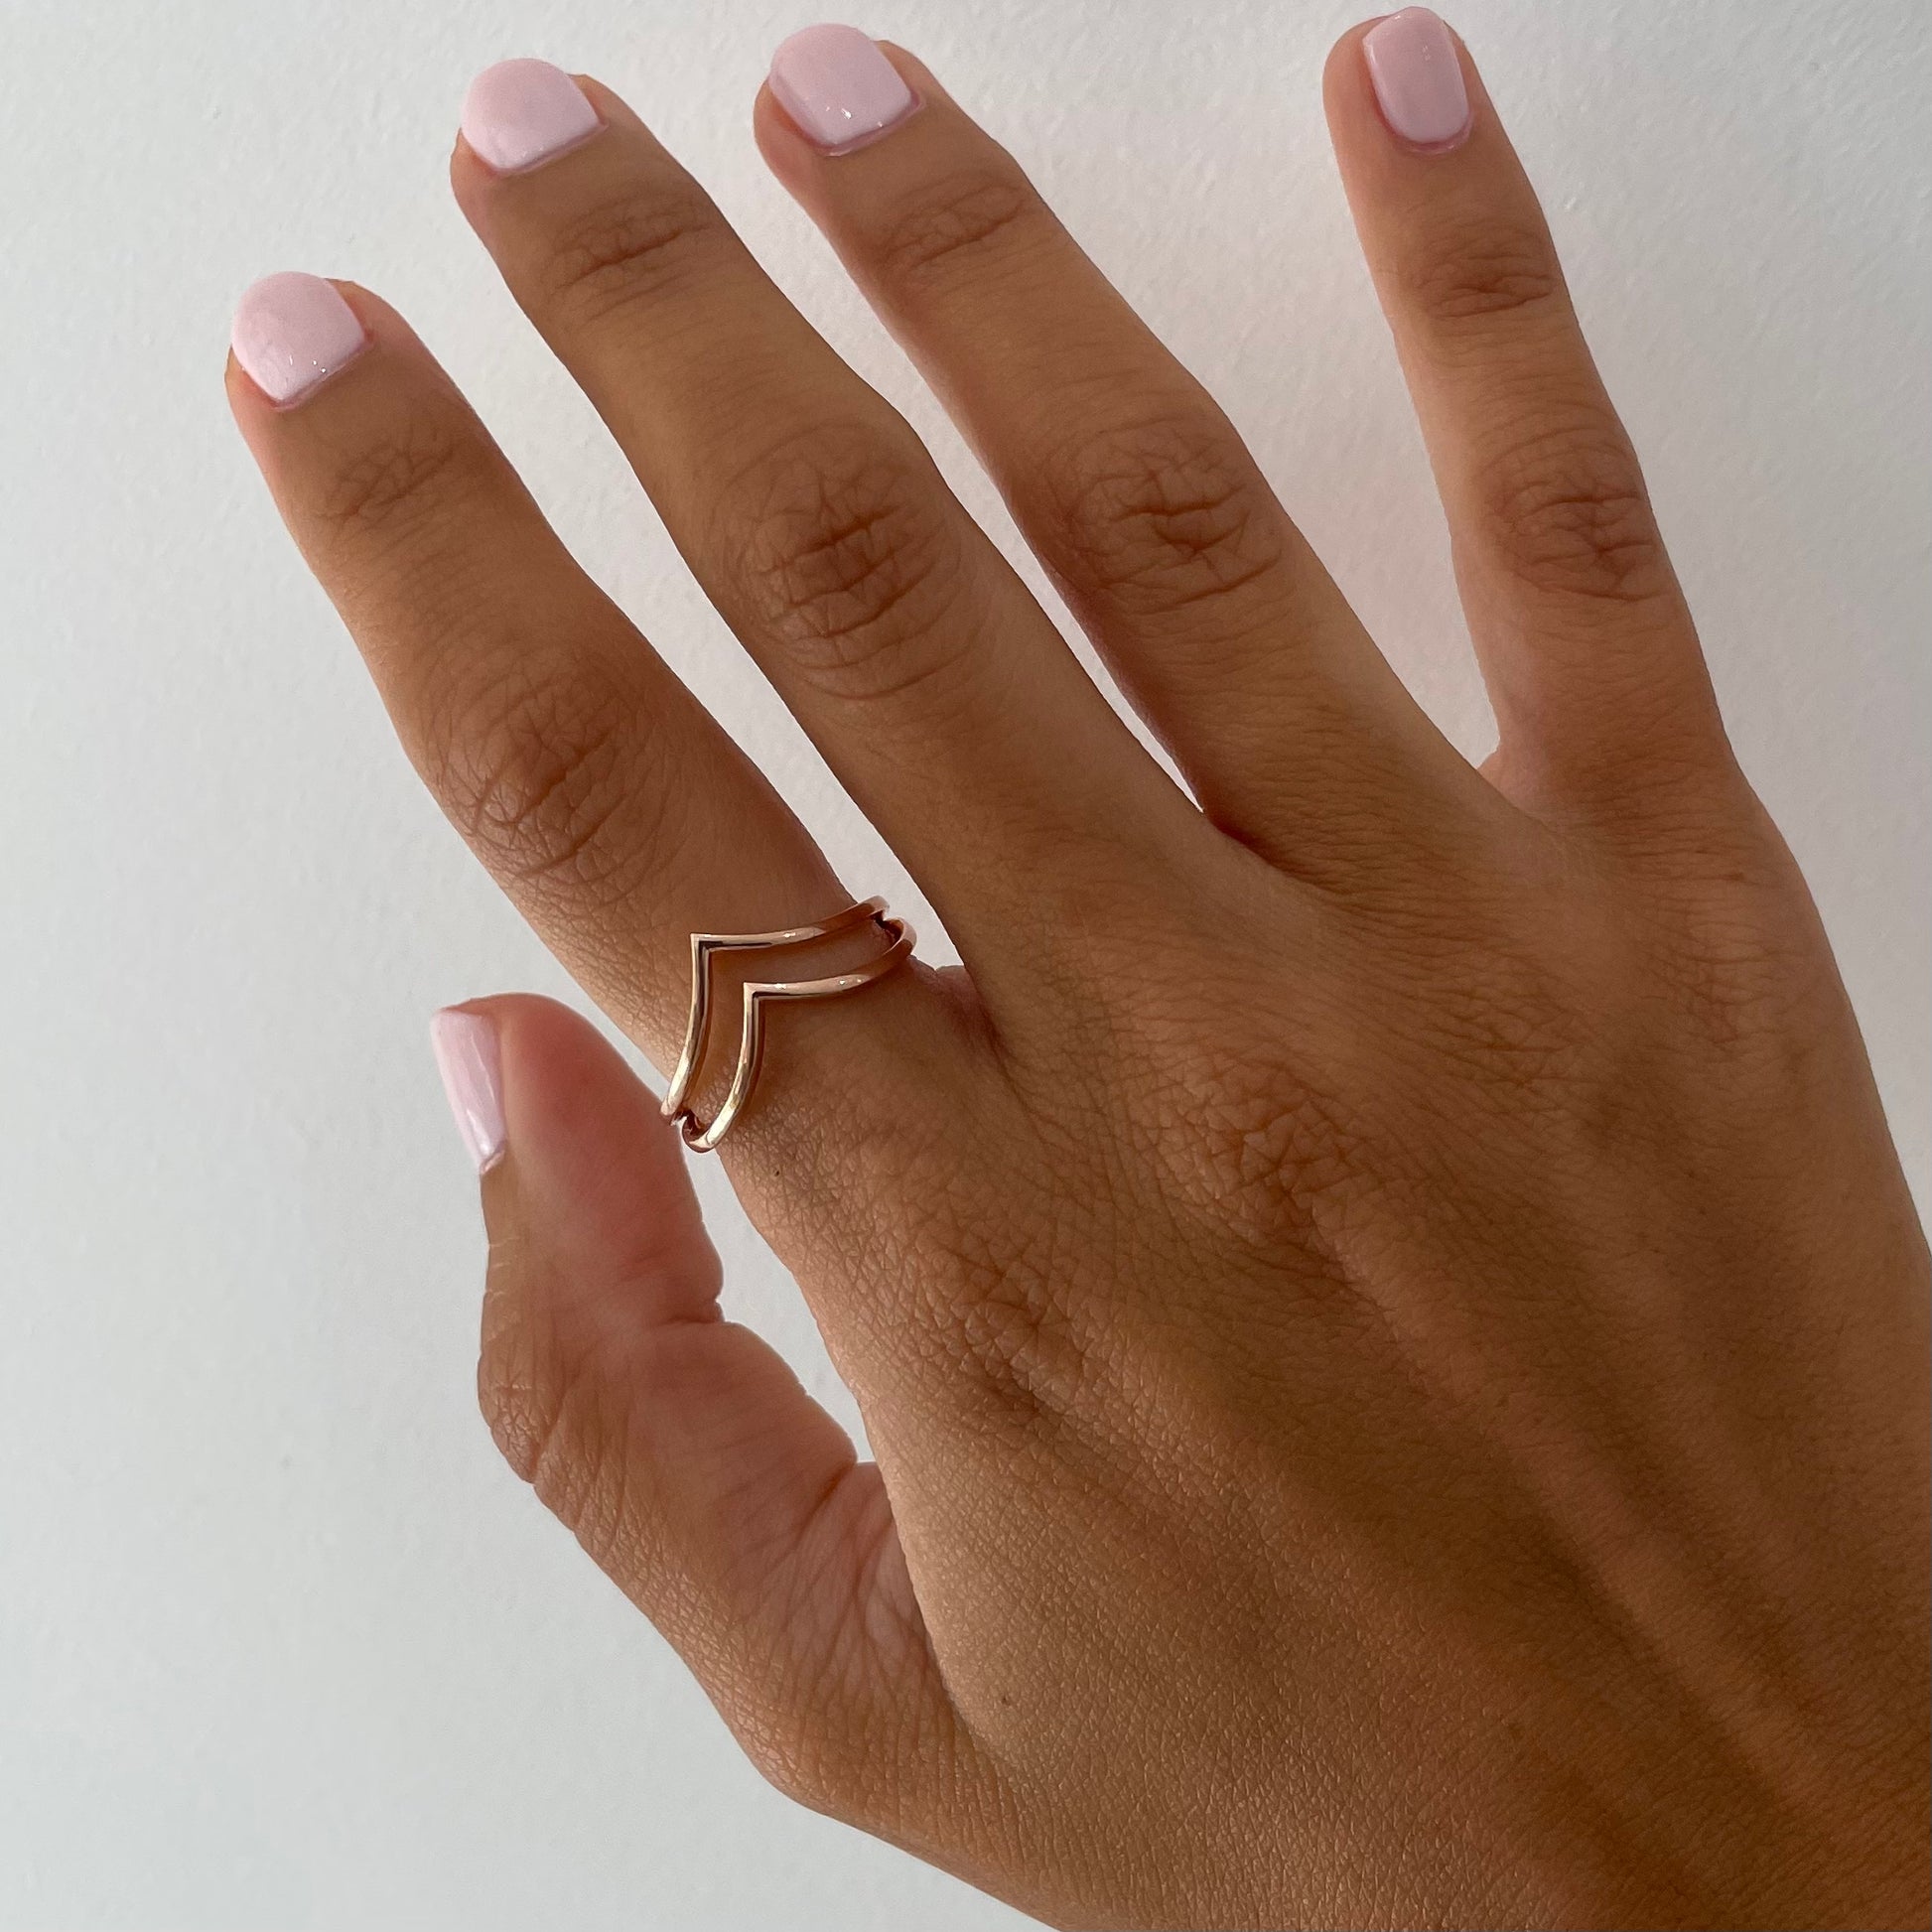 Double V Ring - - Jewelry - Goldie Paris Jewelry - Ring